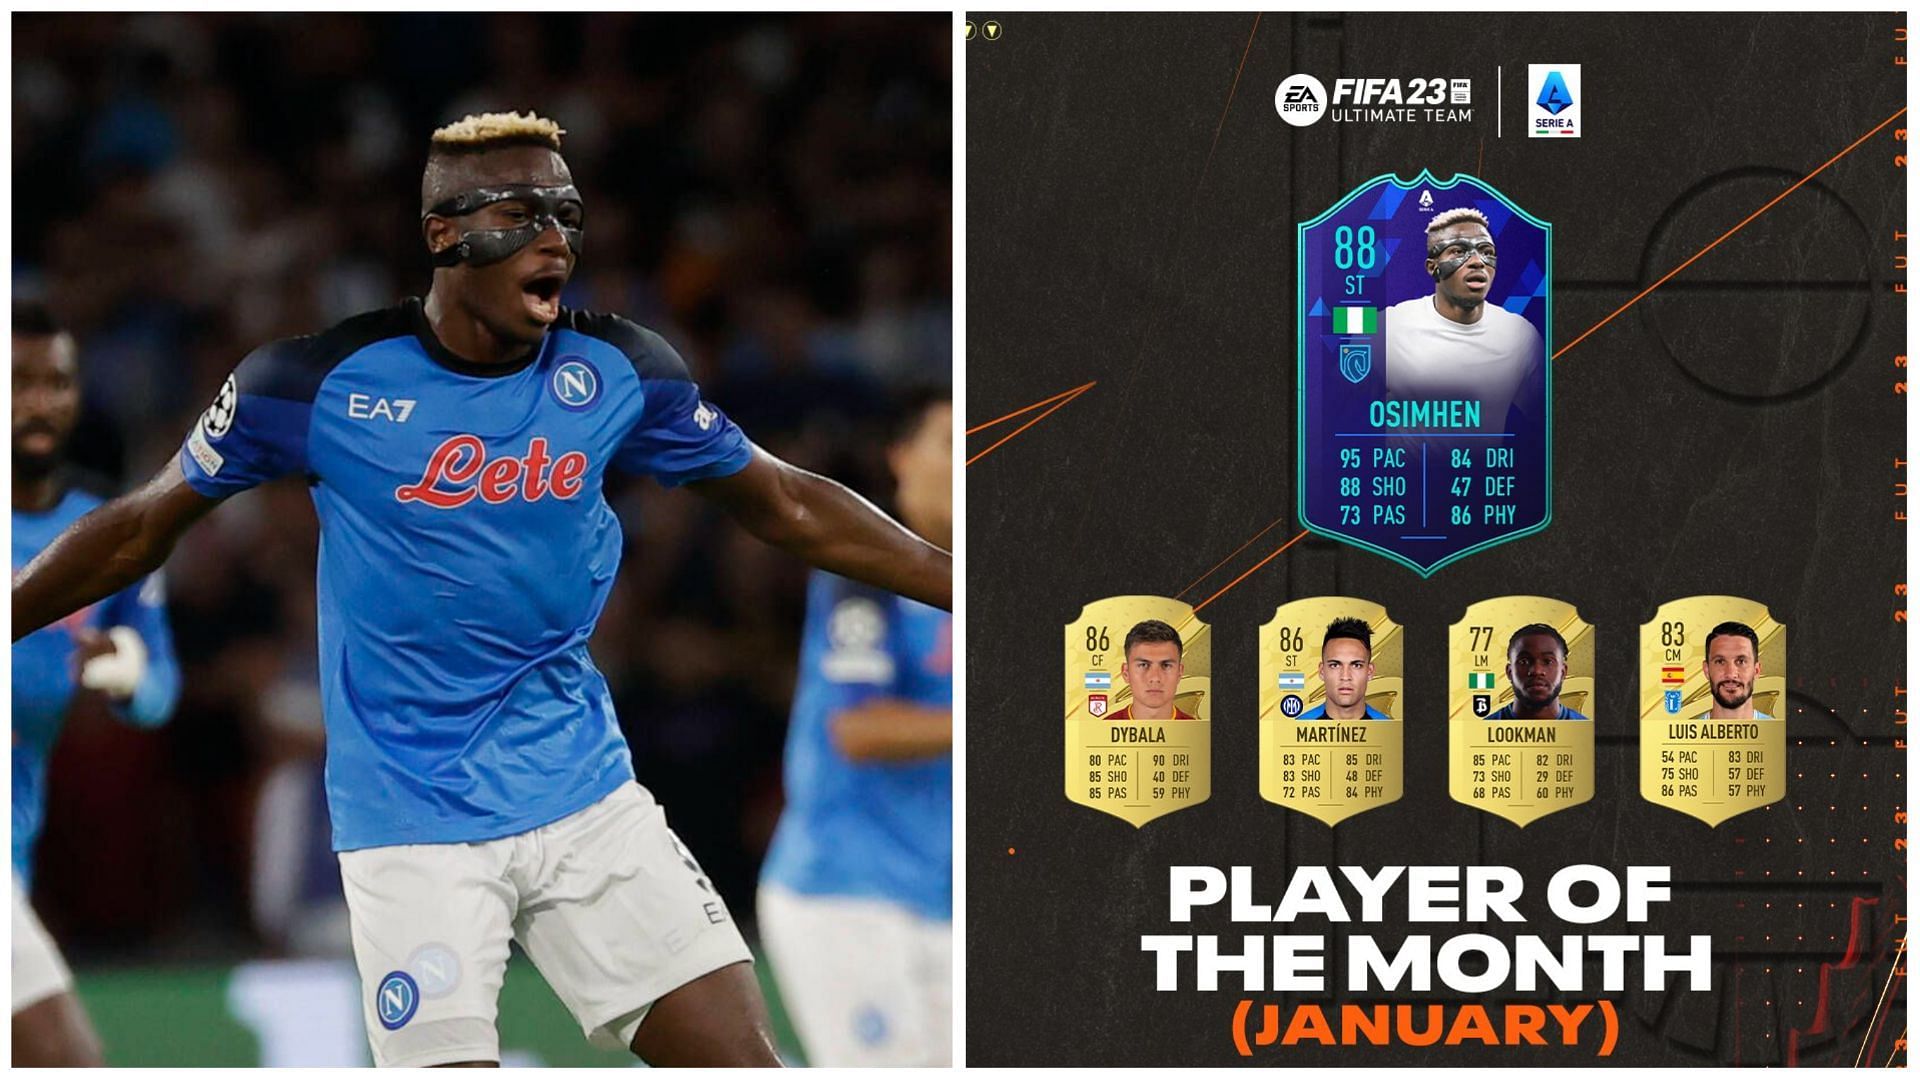 POTM Osimhen SBC is live in FIFA 23 (Images via Getty and EA Sports)